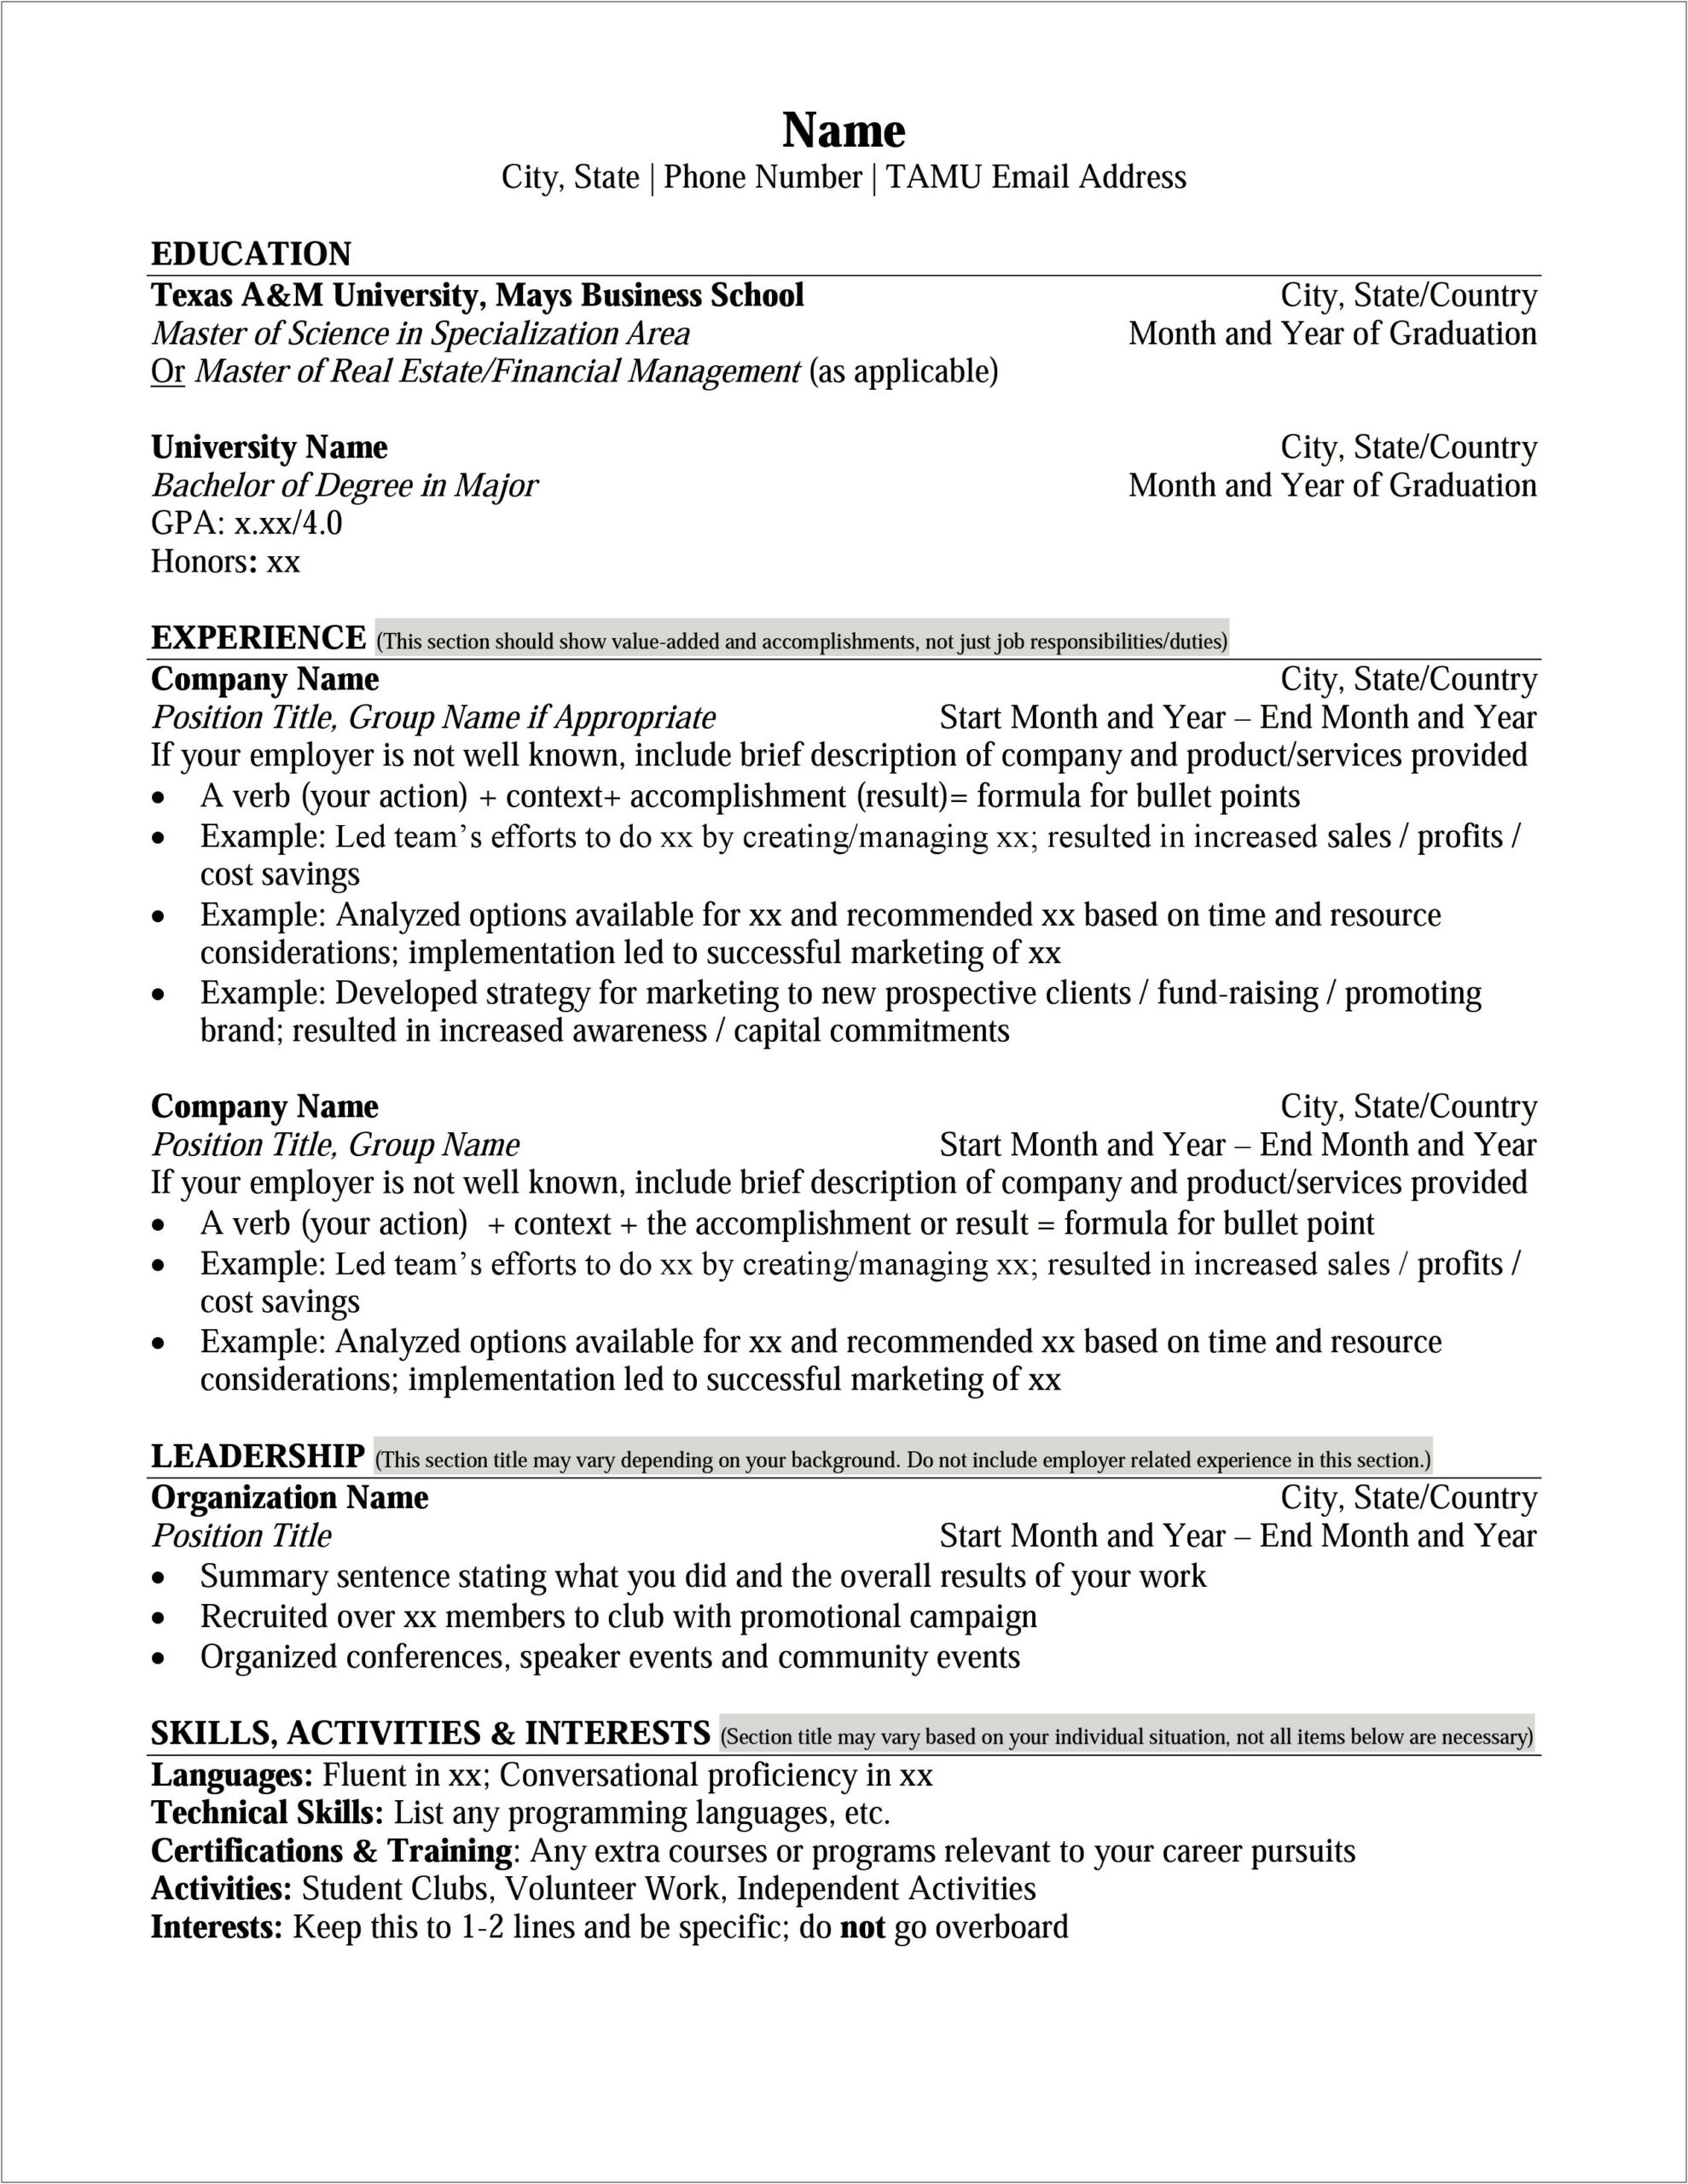 Sample Resumes With Masters Degrees